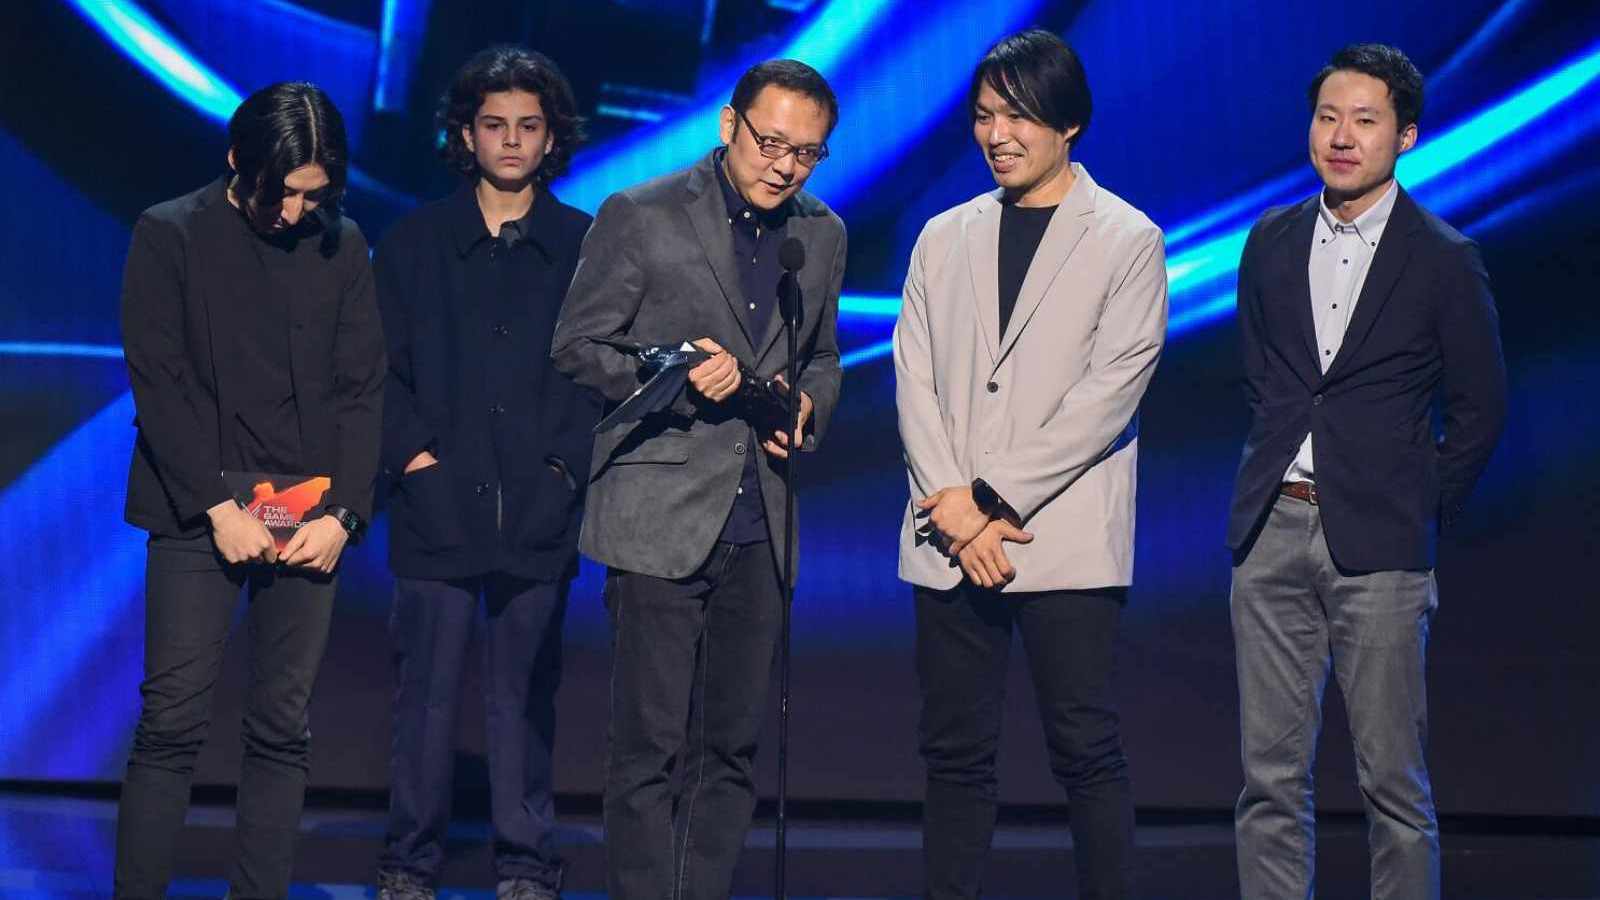 Game Awards stage crasher hit with lifetime ban after showing up again -  Dexerto